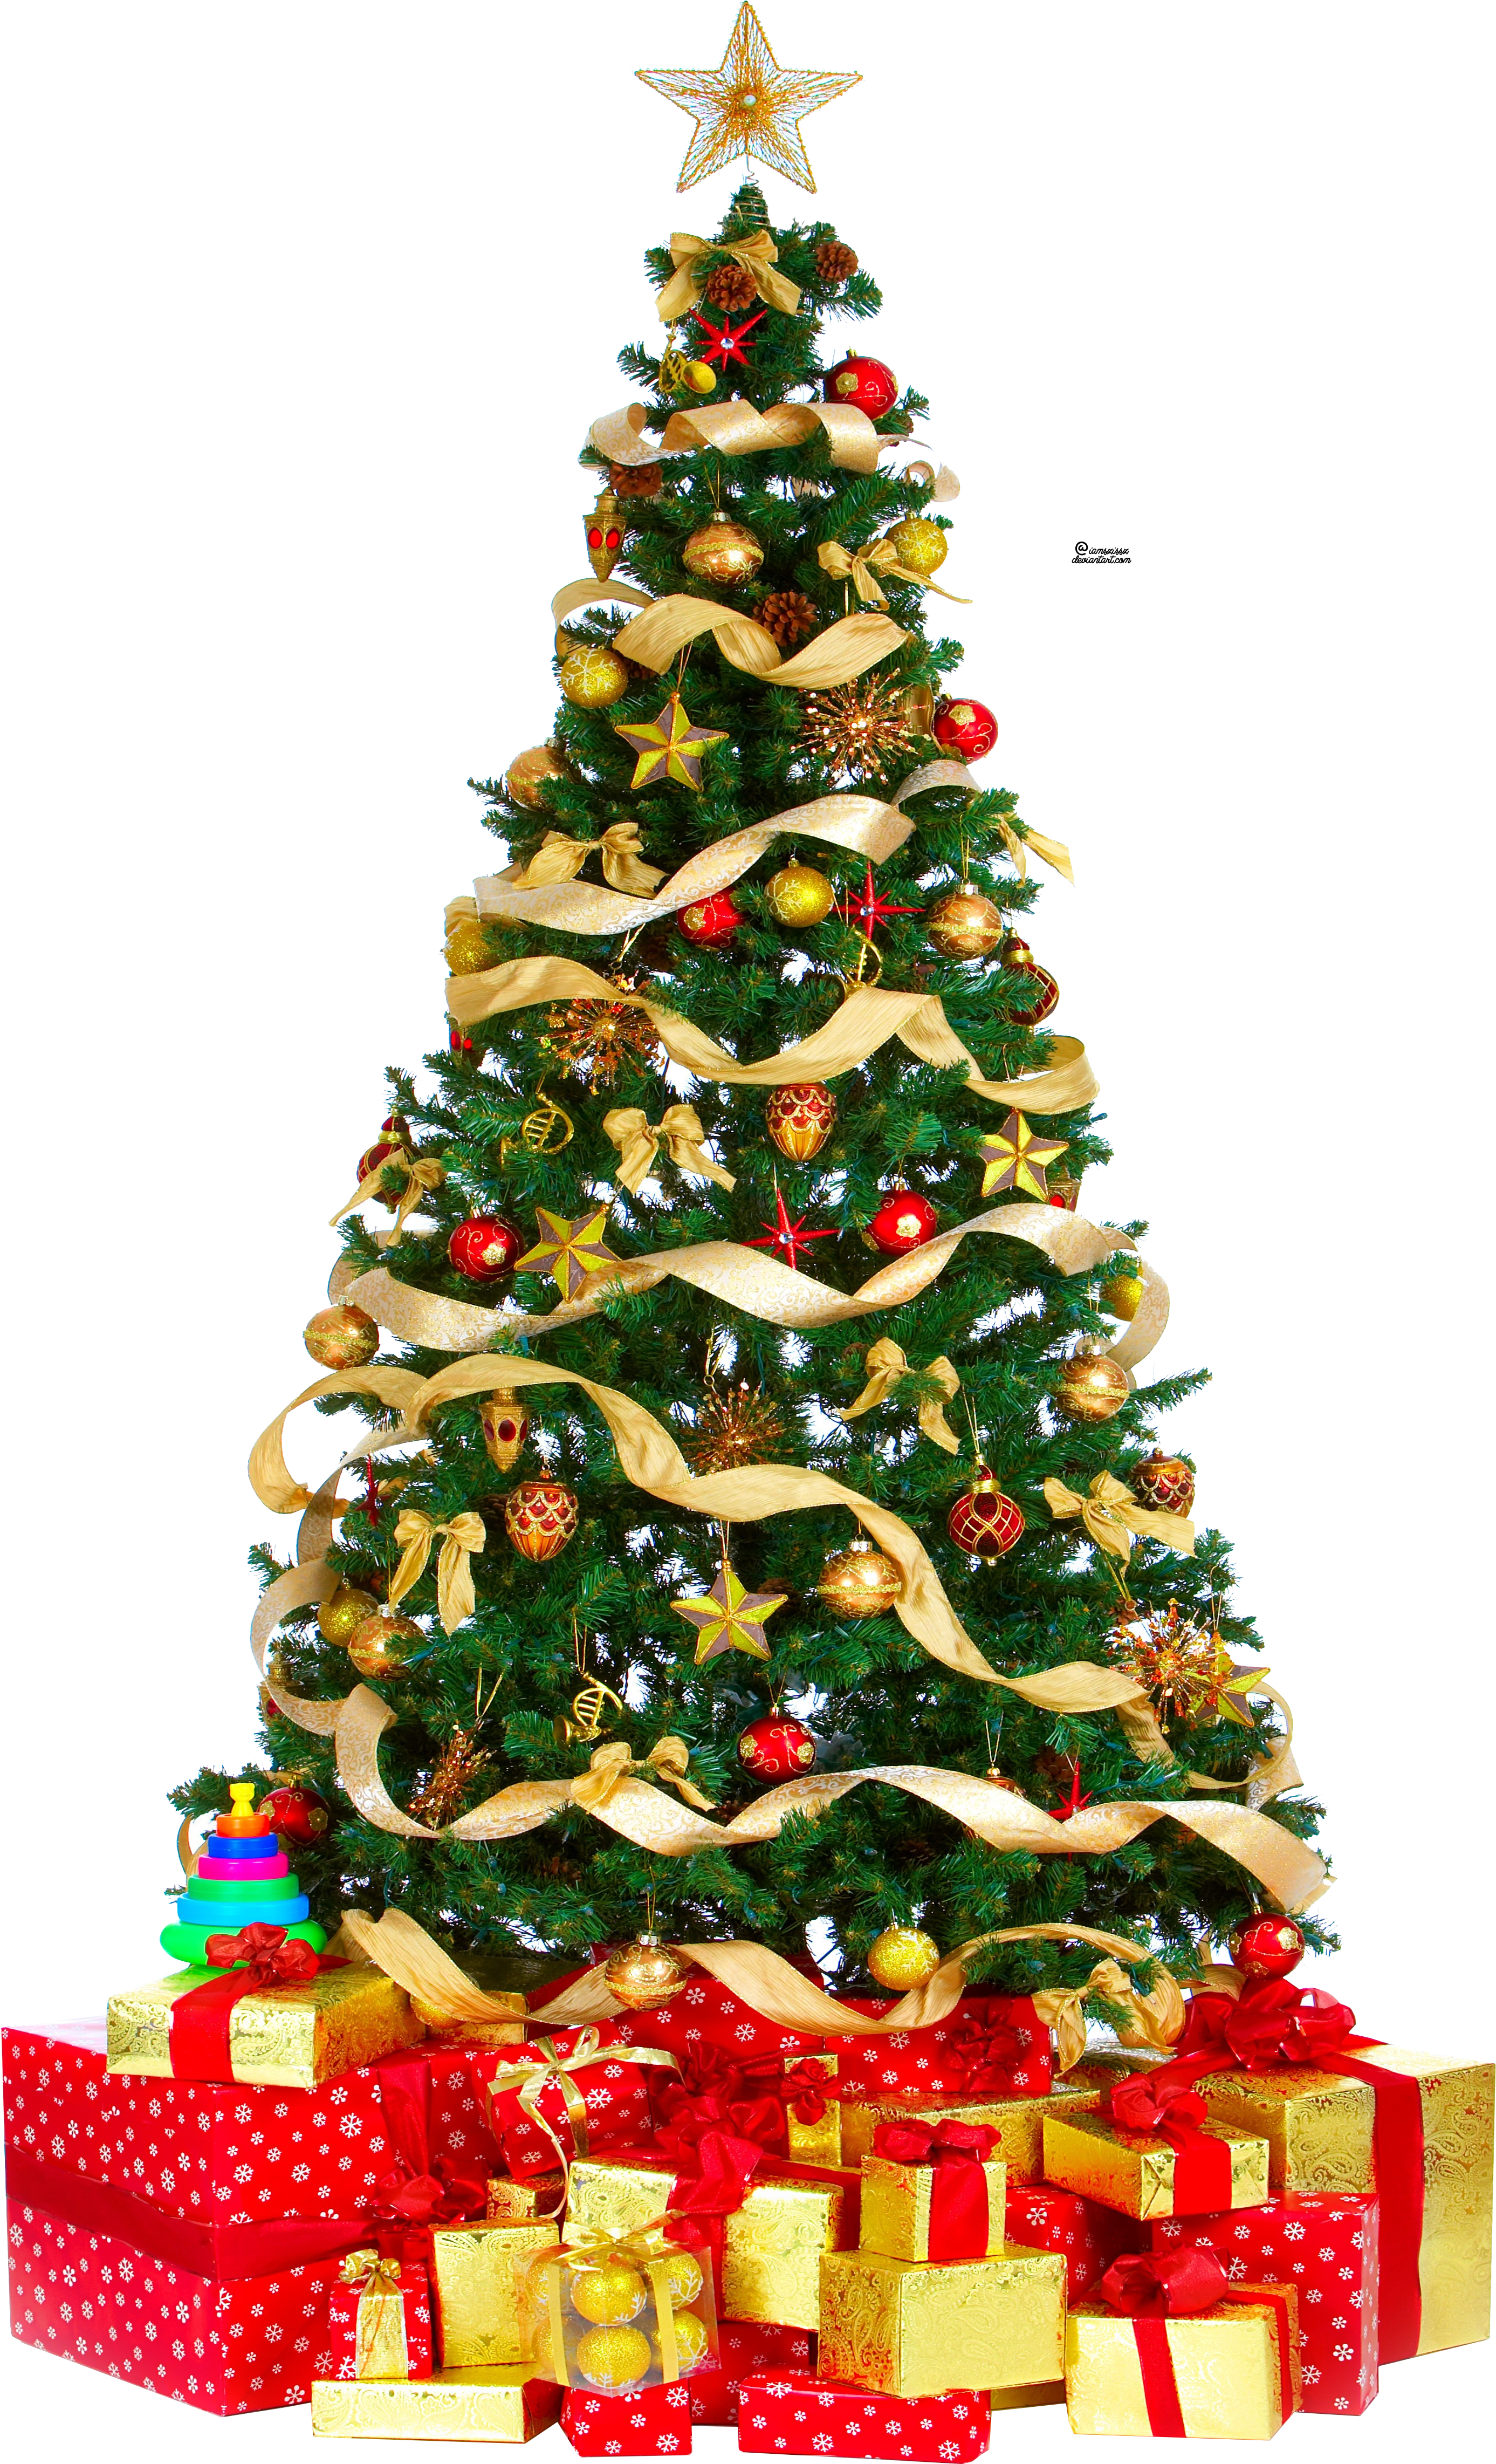 Ideas for Decorating a Christmas Tree | Teenagers Pro